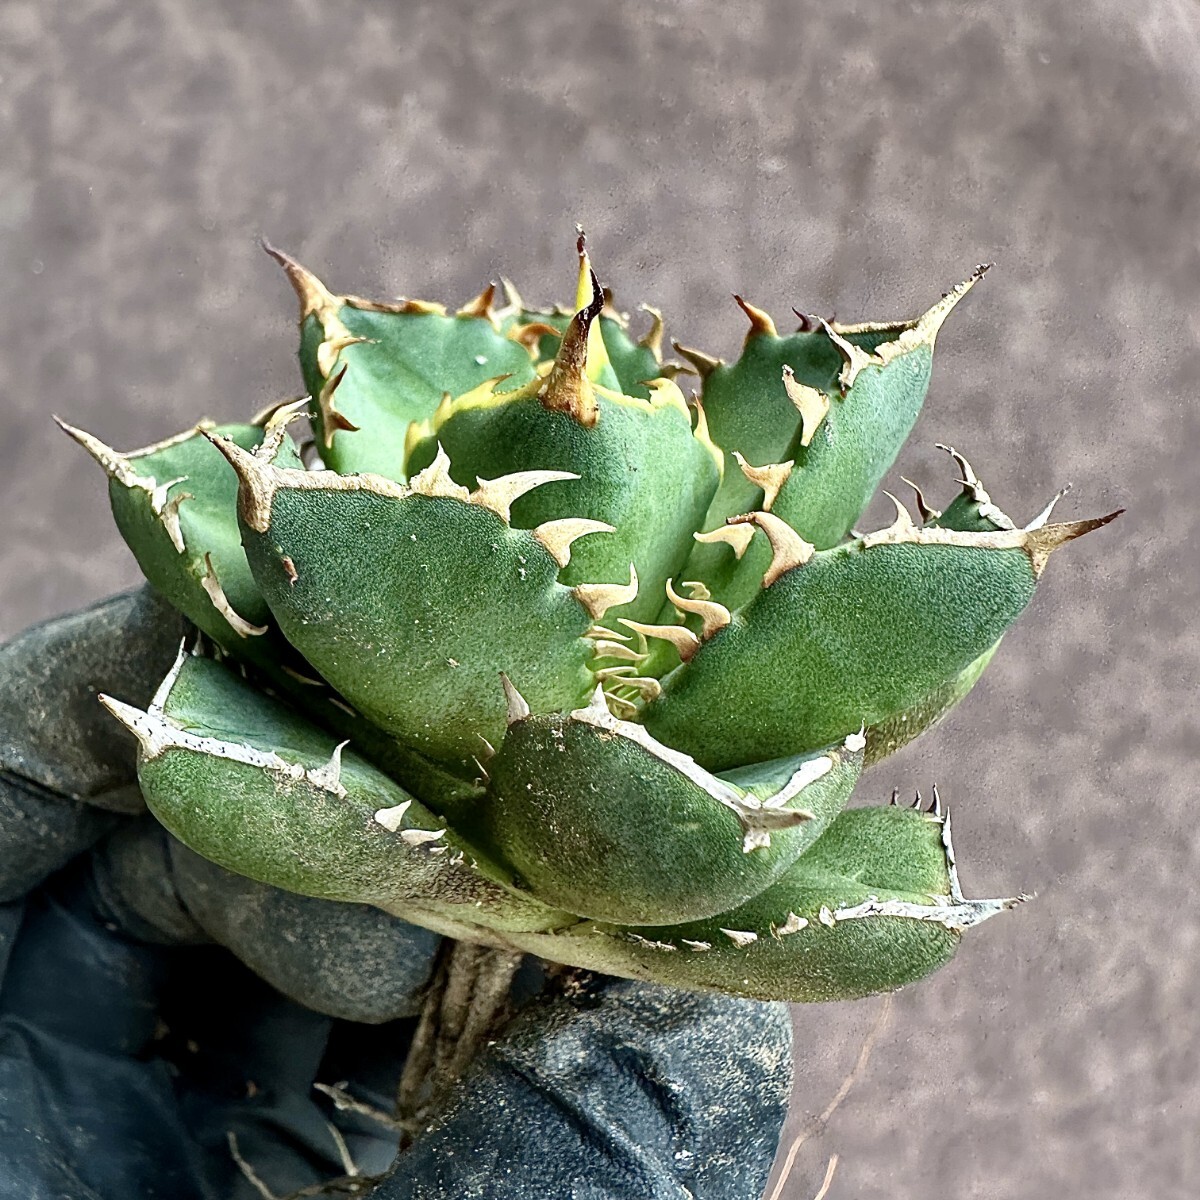 [Lj_plants]Z60 agave chitanota emperor *Emperor* a little over . finest quality beautiful stock ultra rare! limitation stock 